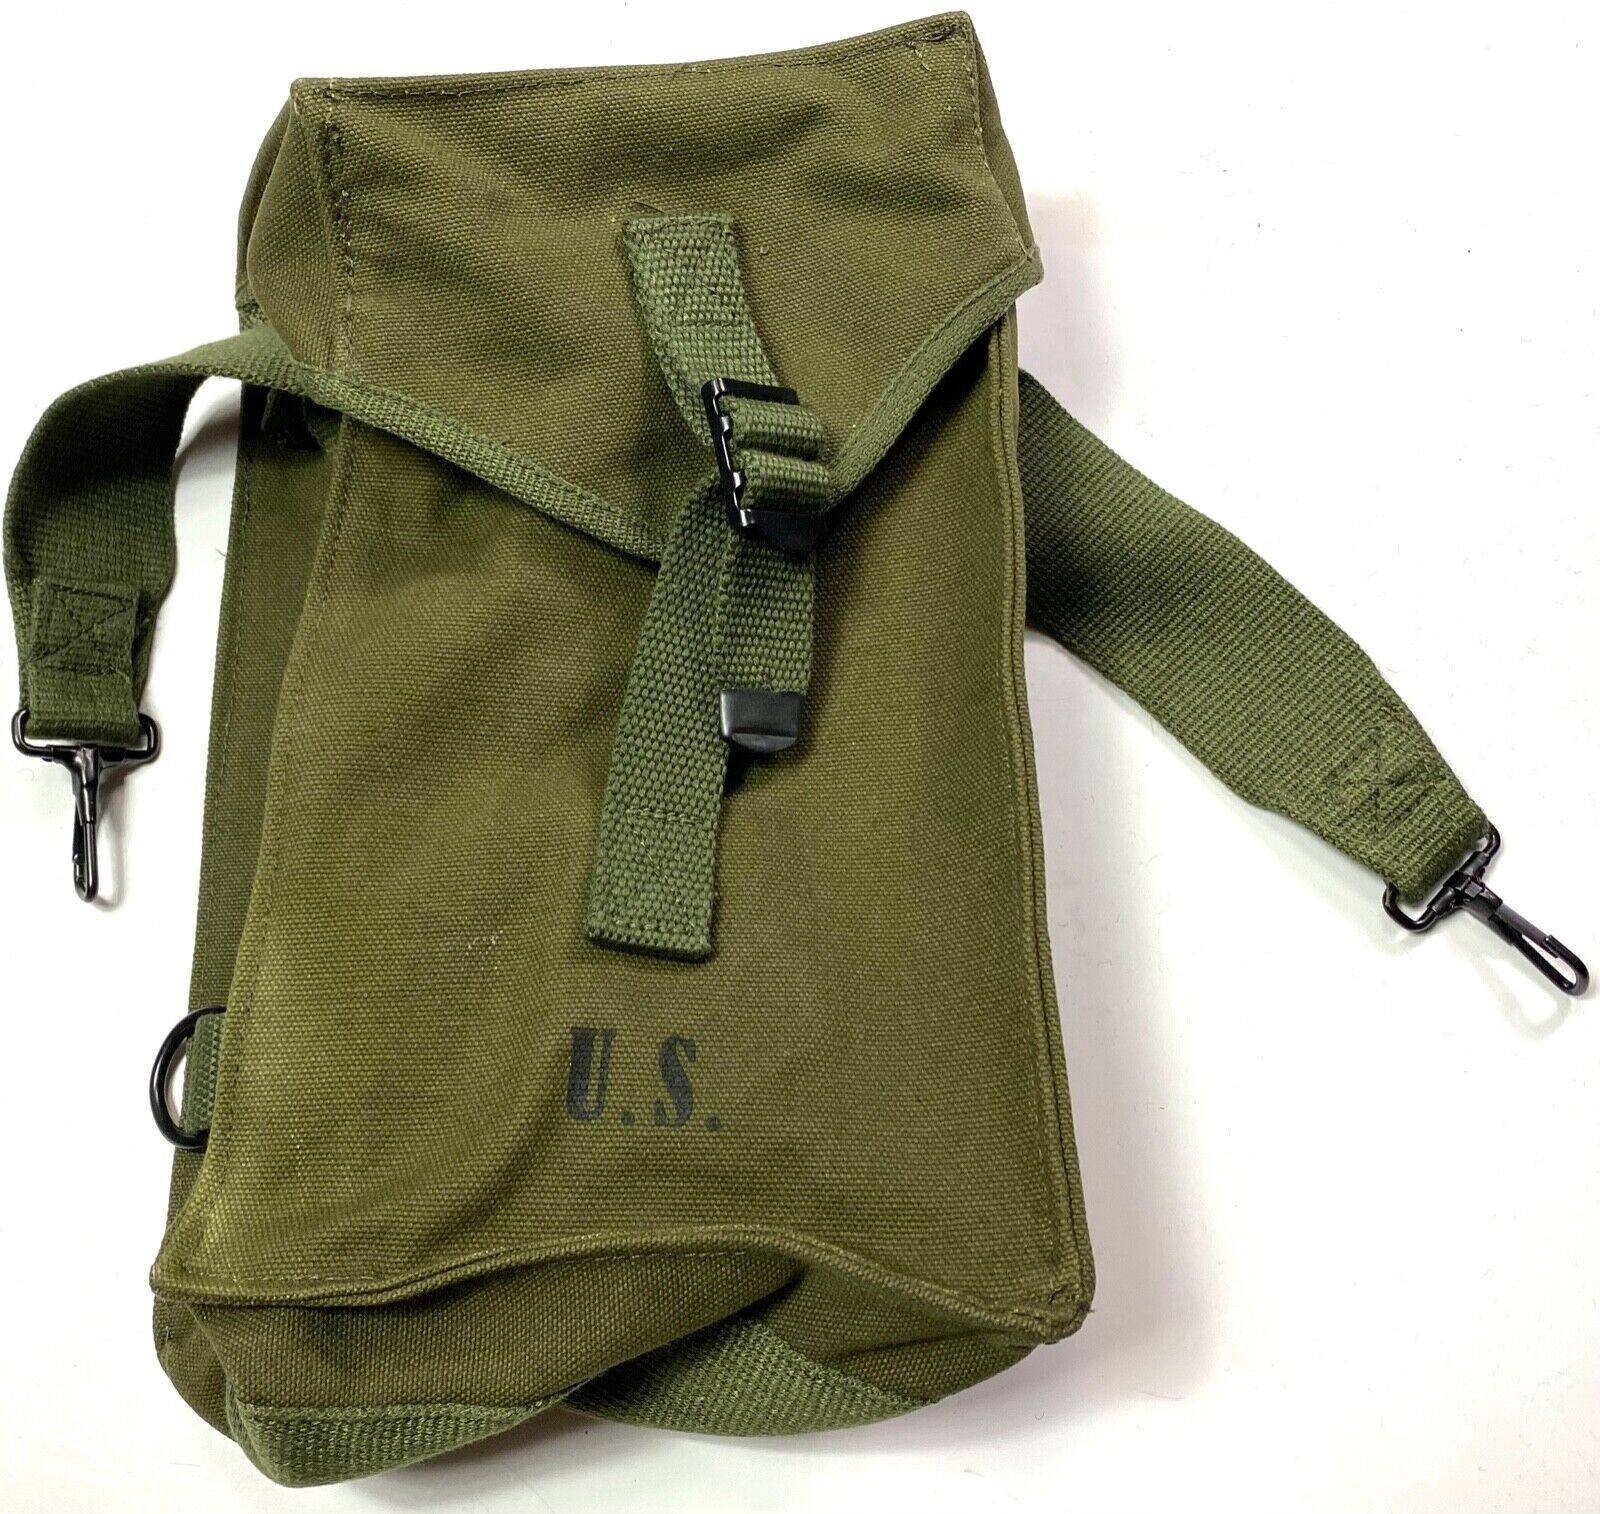 WWII US GP M1 AMMO GENERAL PURPOSE EQUIPMENT CARRY BAG-OD#7